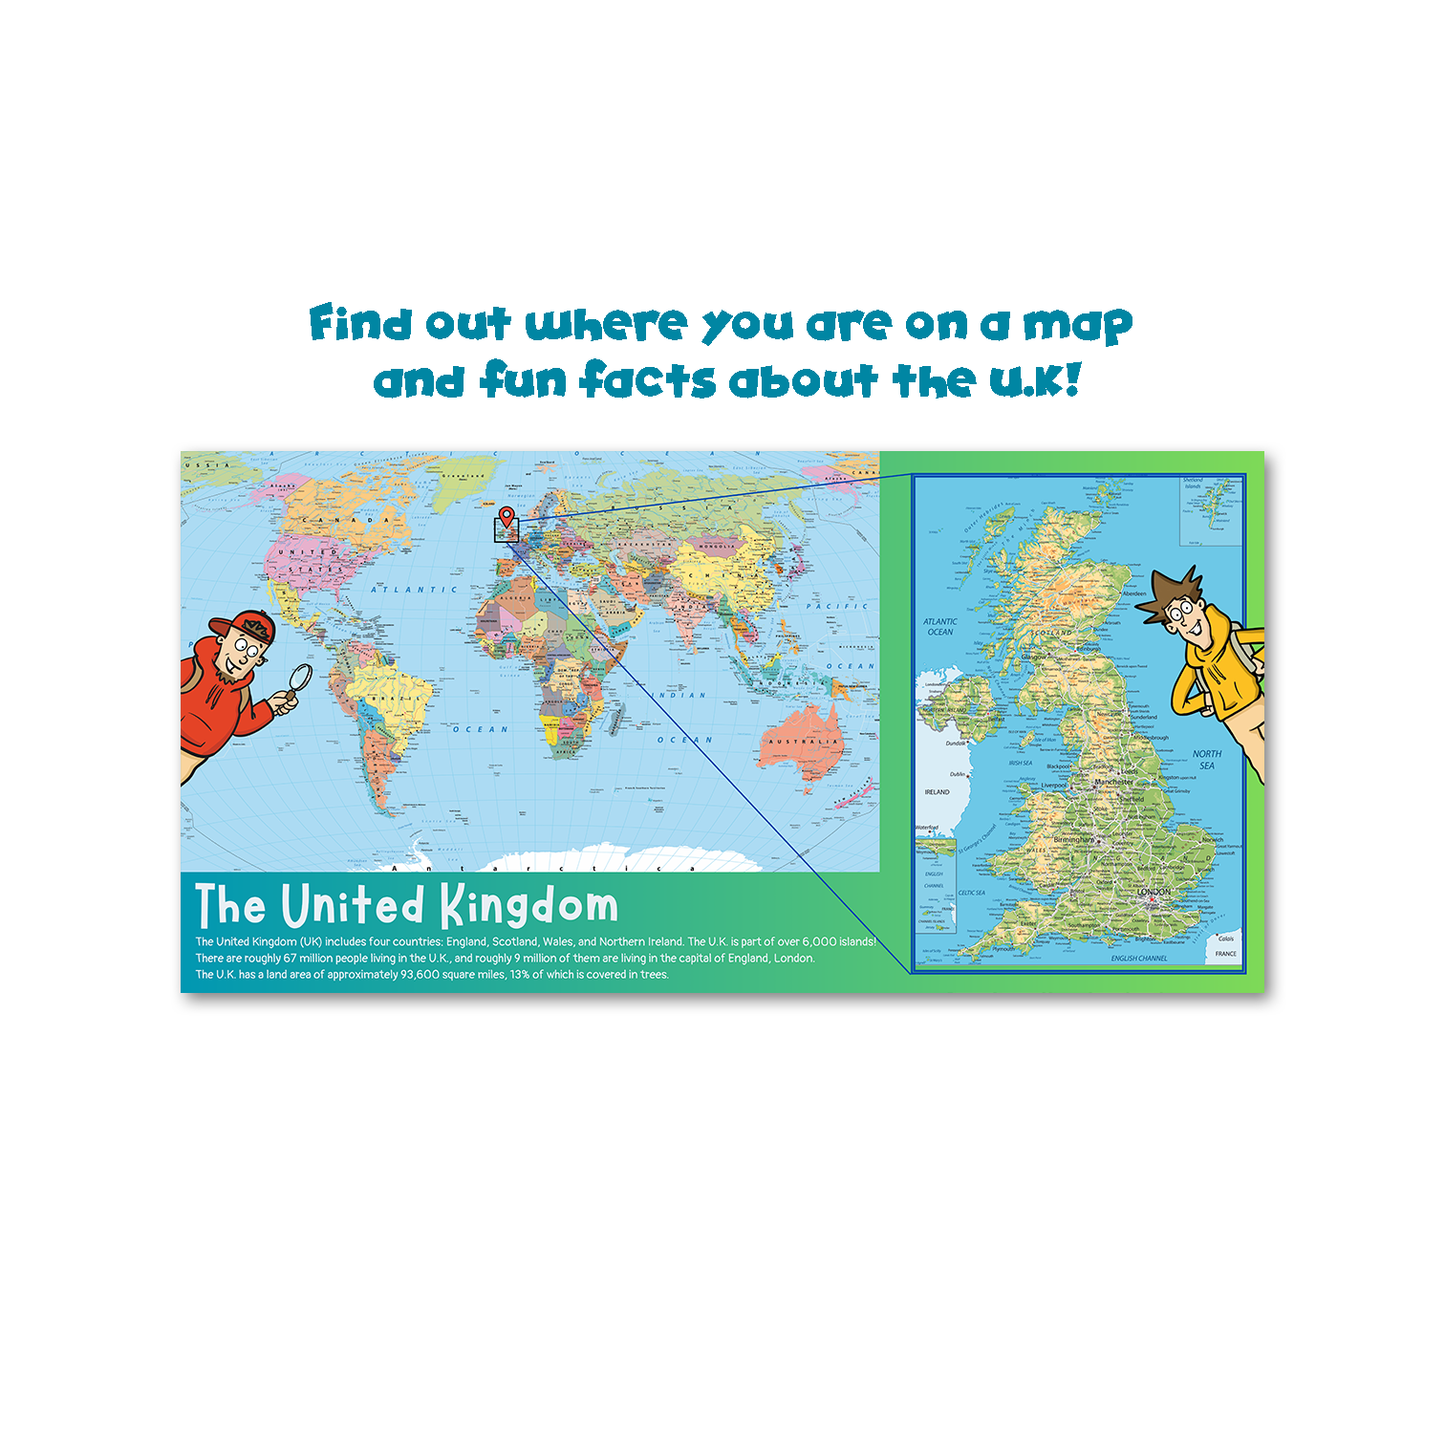 ‘Our ULTRA School Map!’